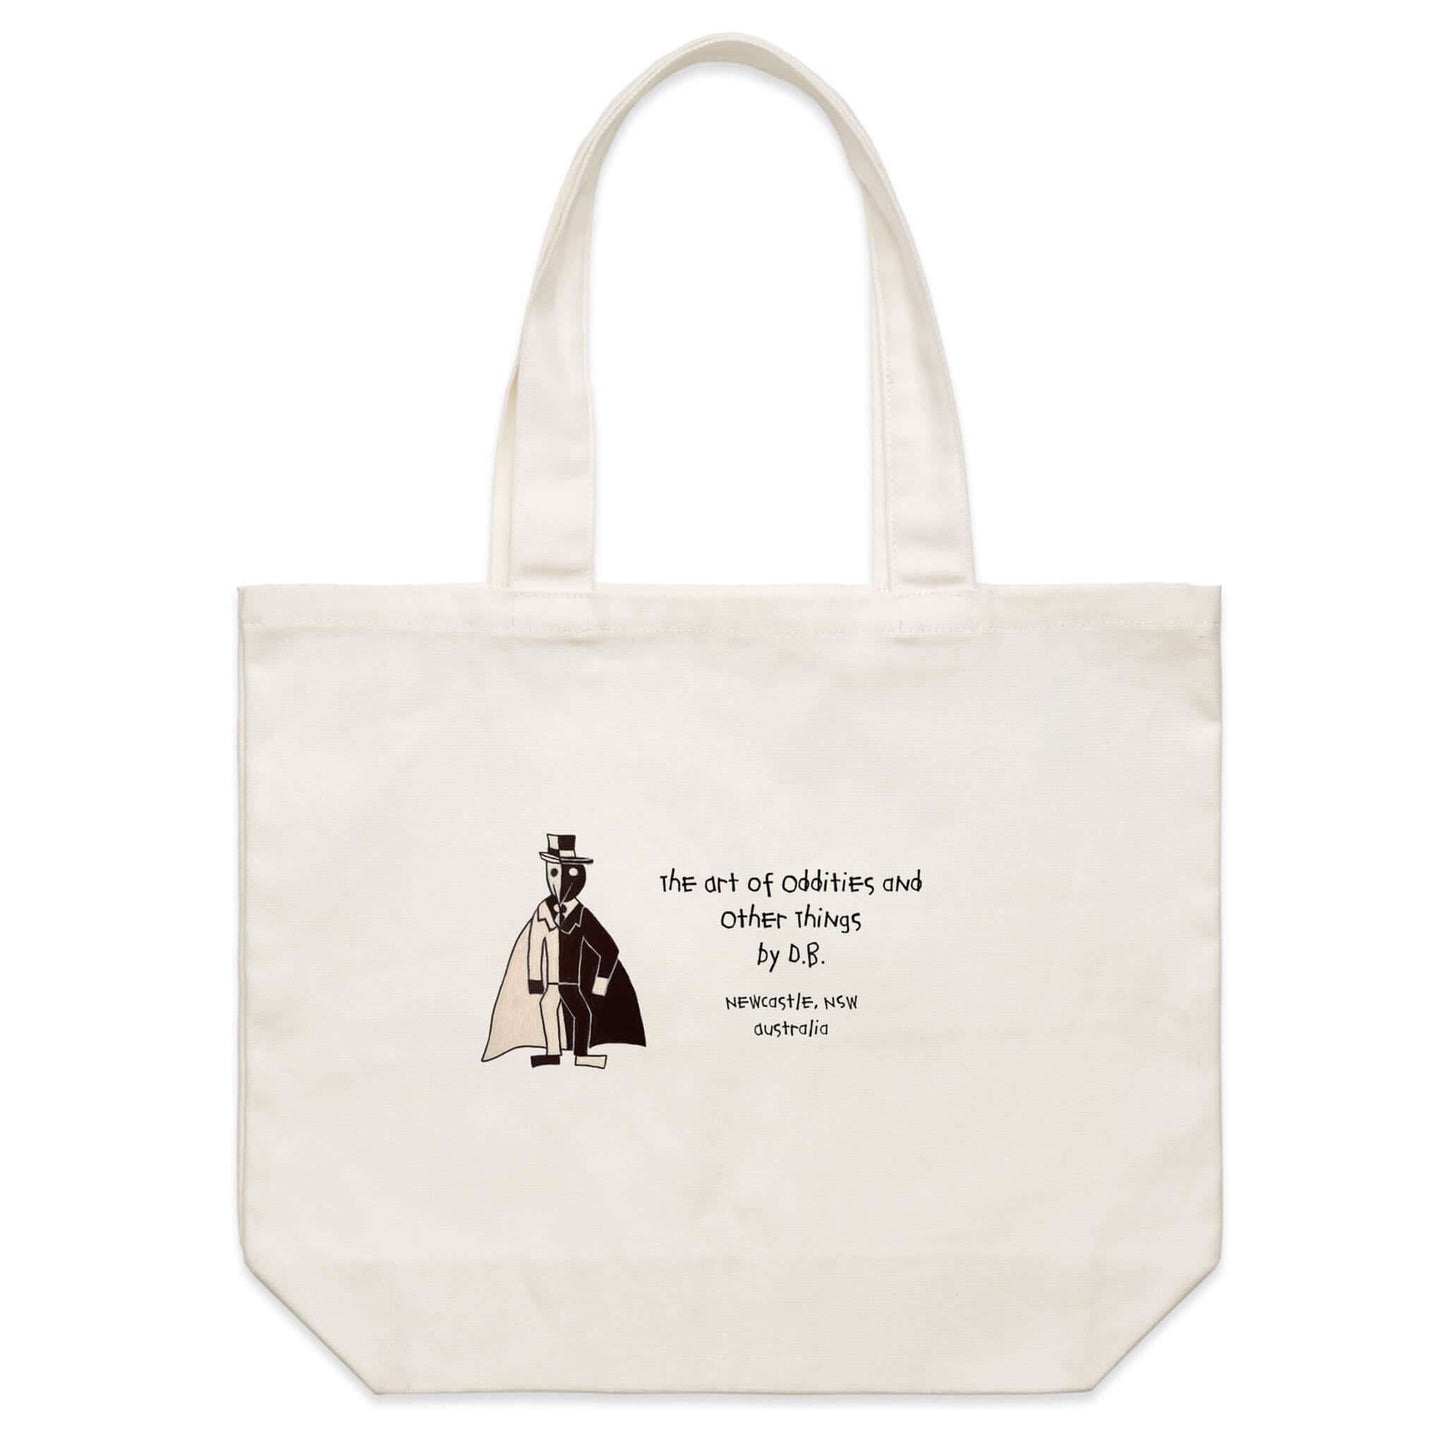 Enviro Shoulder Canvas Tote Bag with Raymond Robinson, the Bravest Man by D.B. print